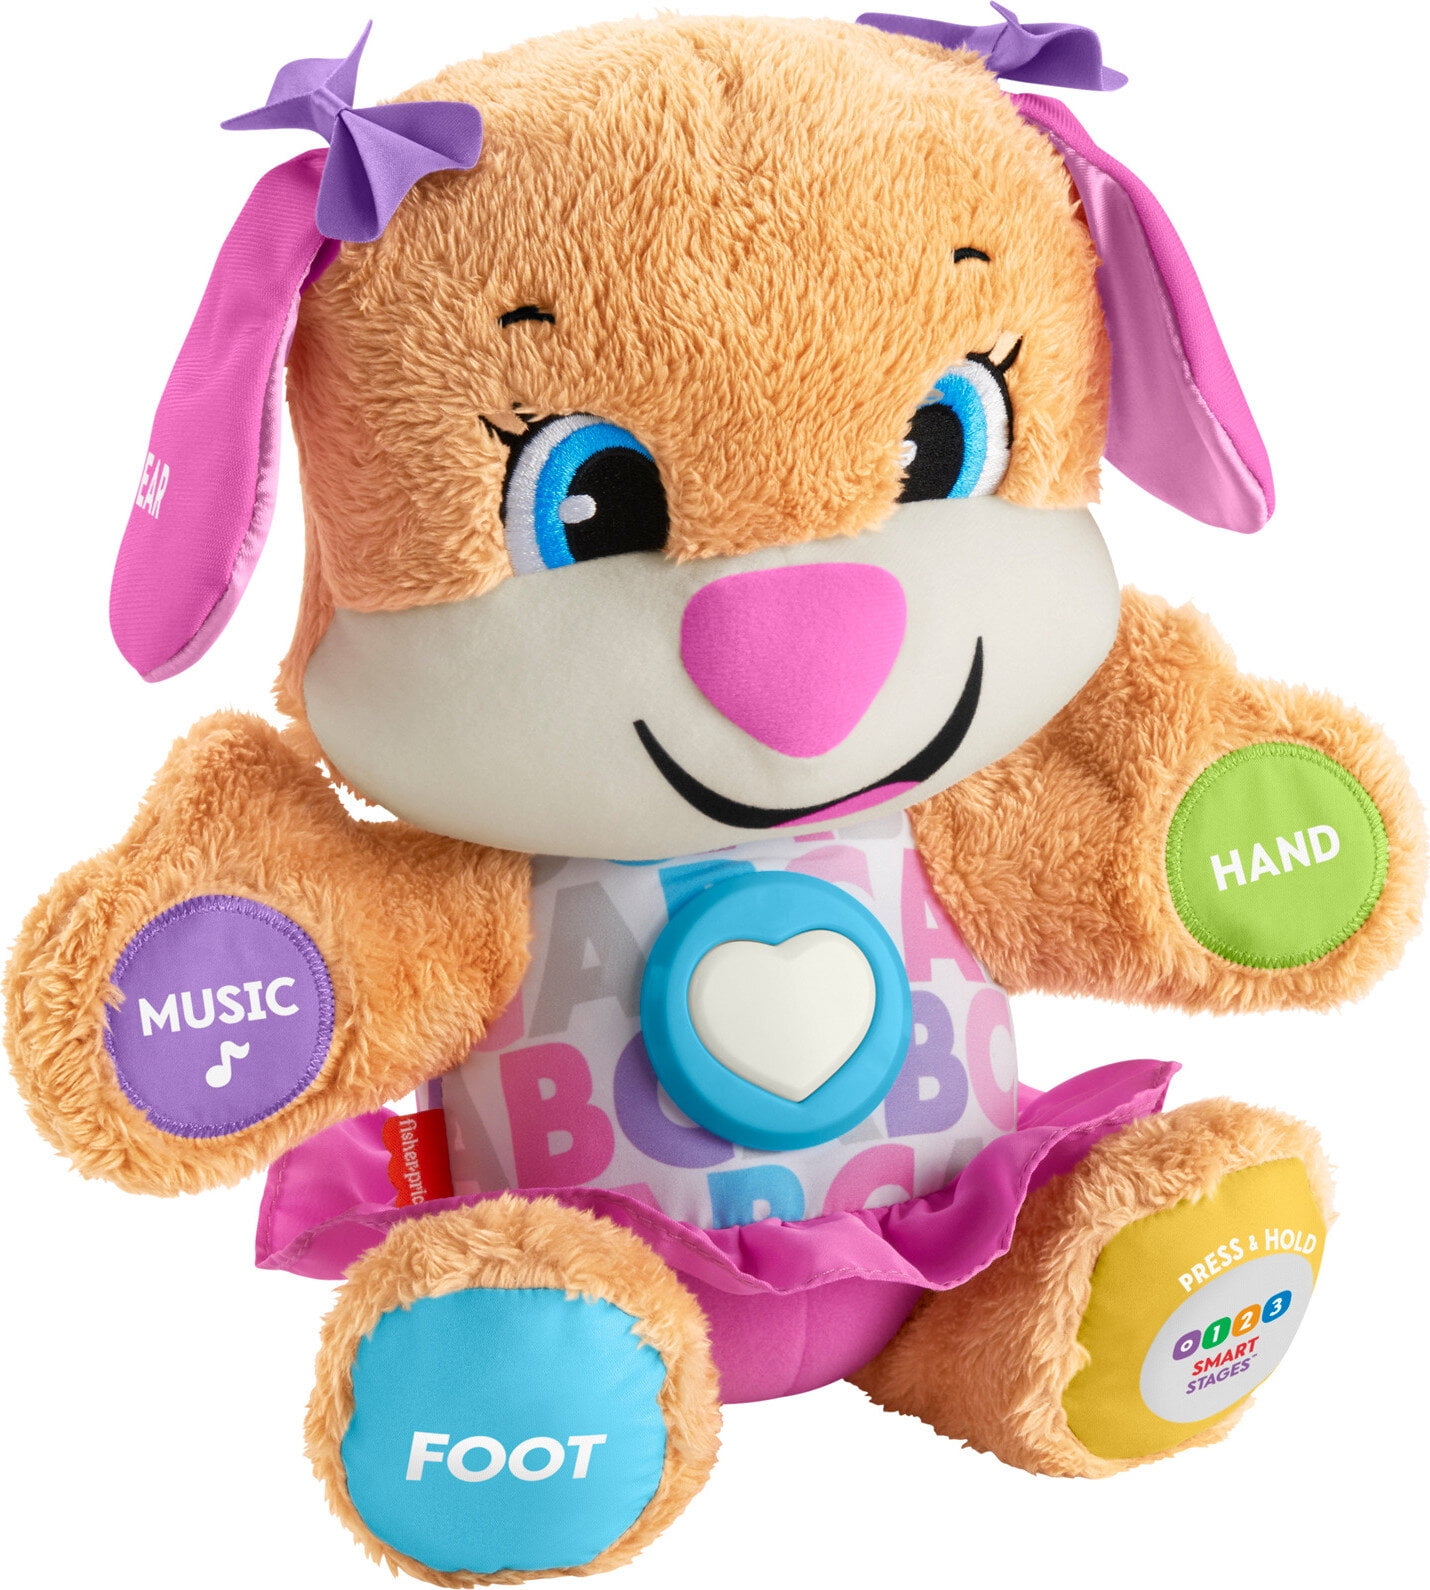 Fisher-Price Plush Sis Baby Toy with Smart Stages Learning Content, Laugh & Learn $12.59 + Free S&H w/ Walmart+ or $35+